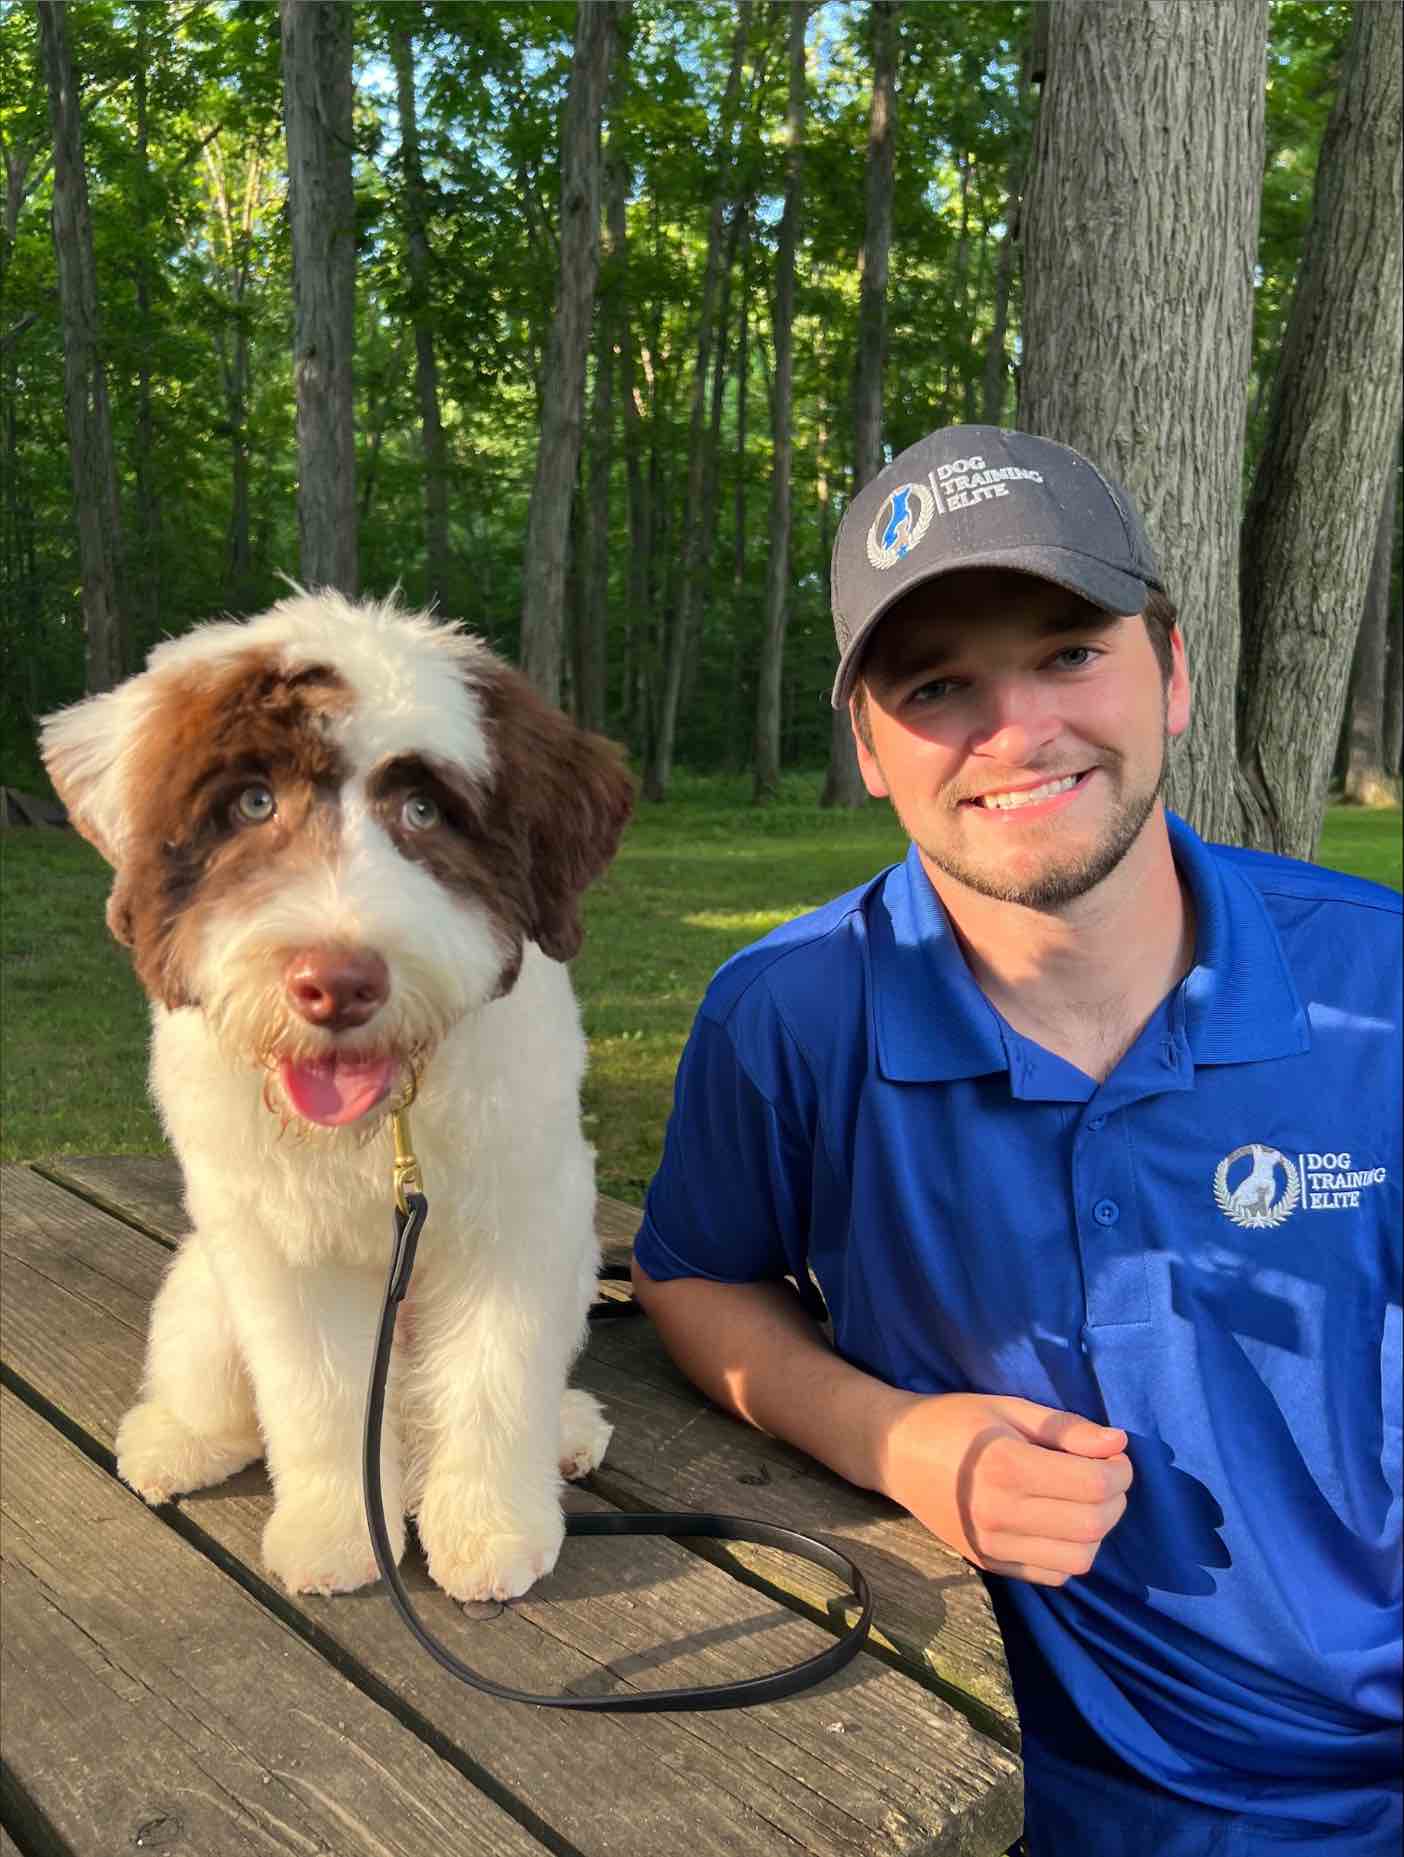 Brennan O'Malley and his cute pup are some of the newest owners to enter the Dog Training Elite world.